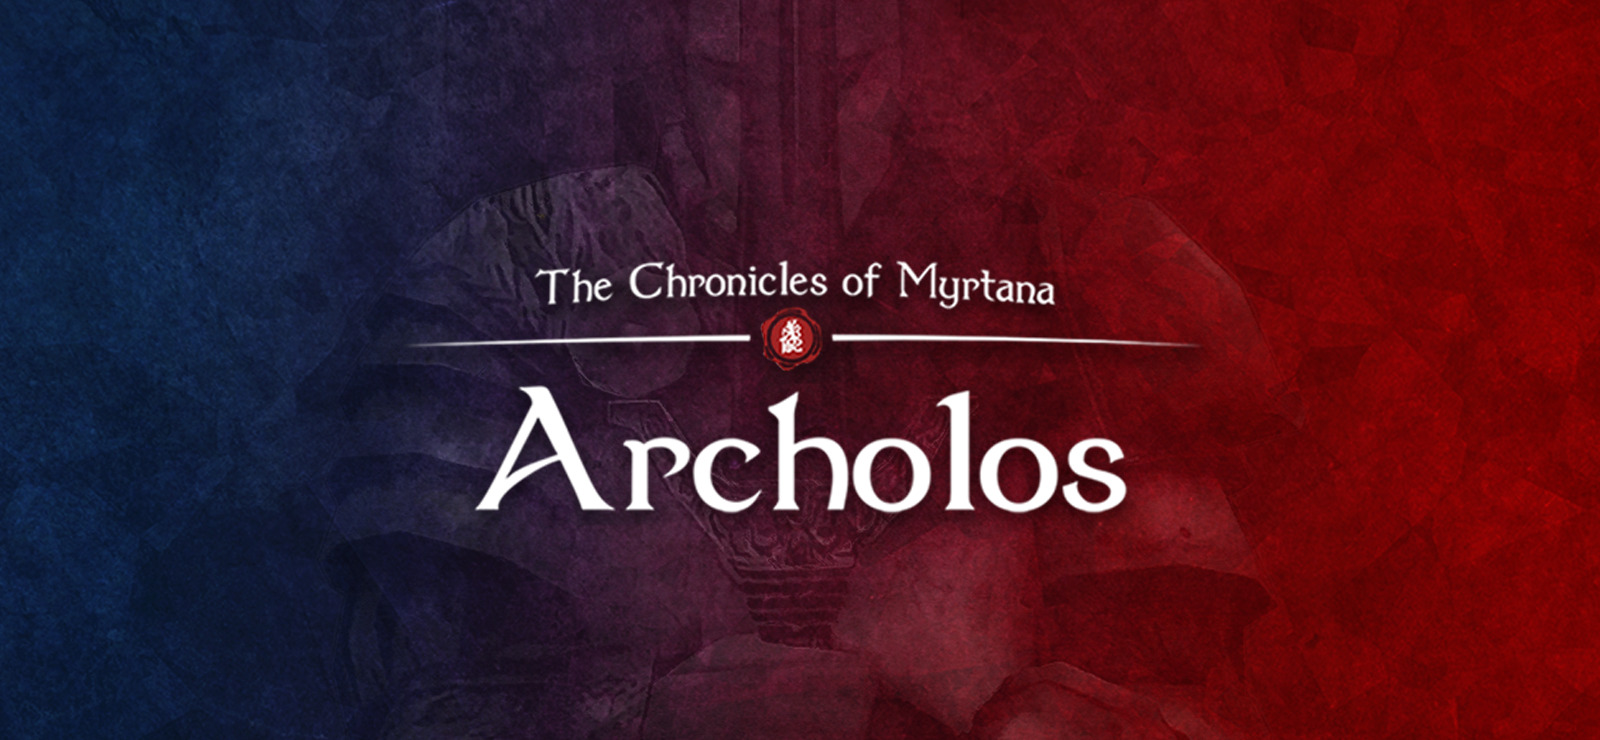 Download The Chronicles Of Myrtana Archolos v1.2.6-GOG